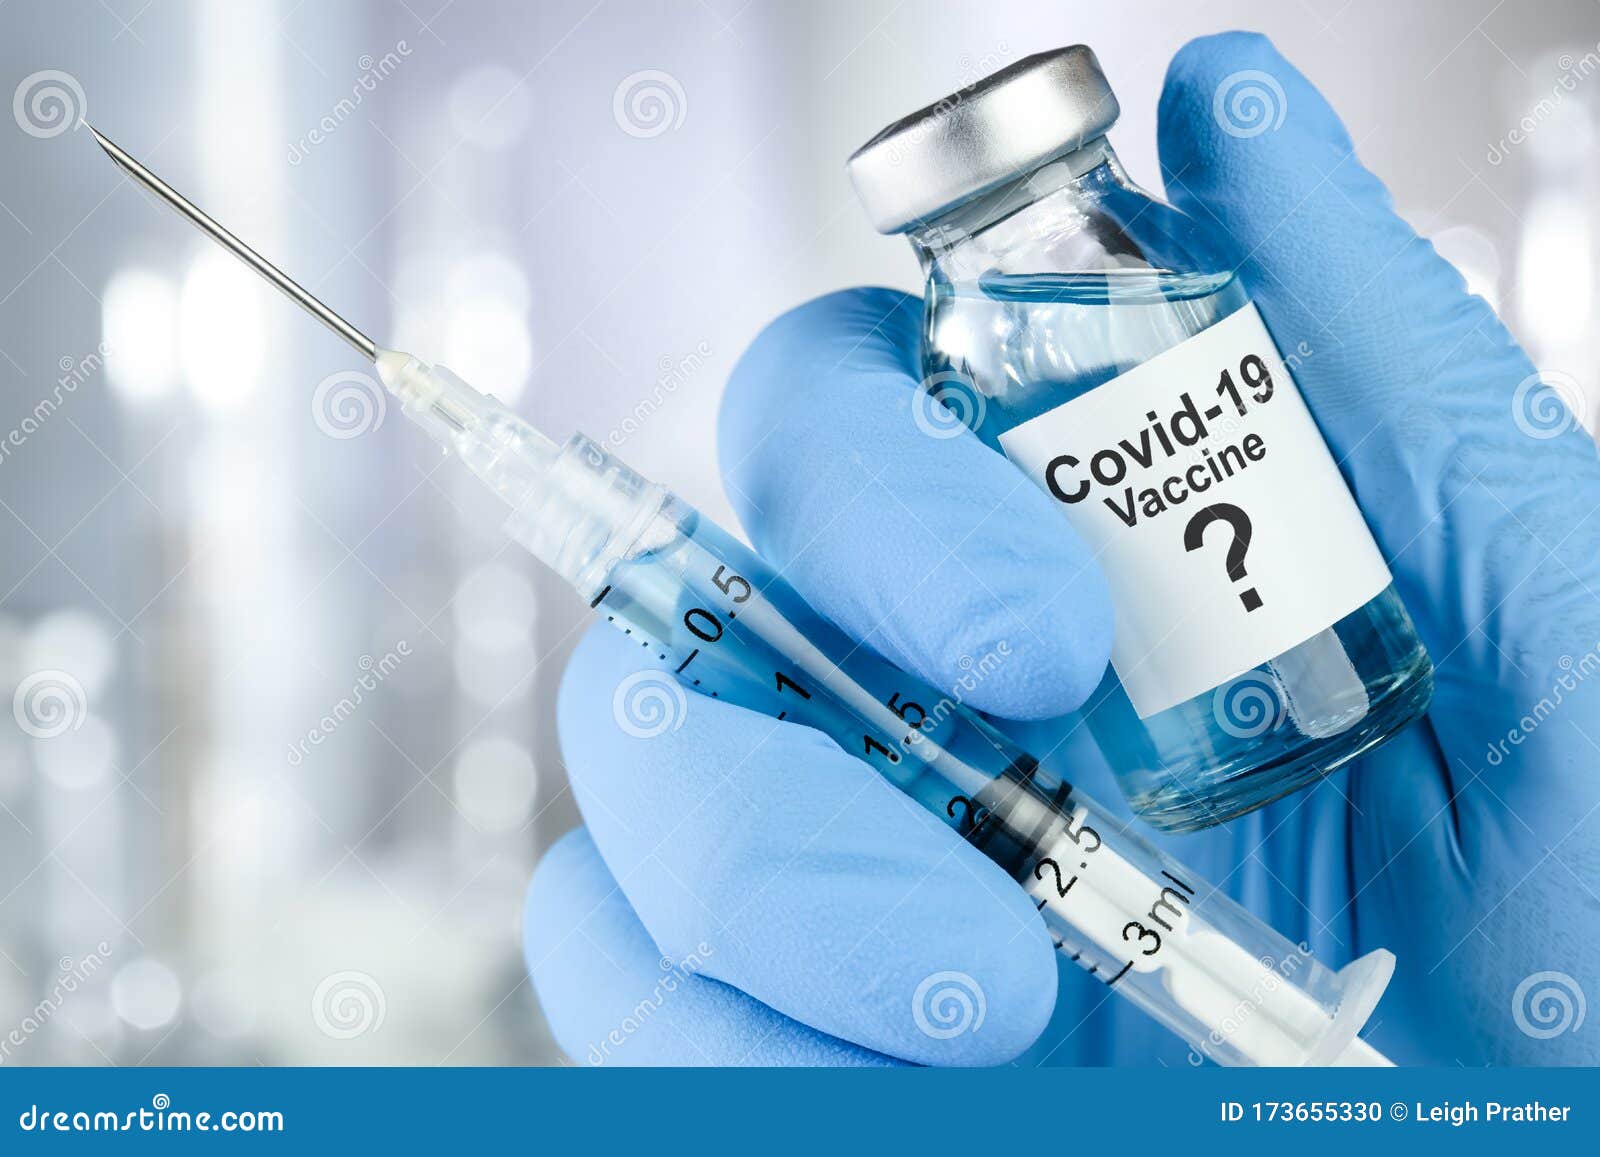 possible cure with a hand in blue medical gloves holding coronavirus, covid 19 virus, vaccine vial